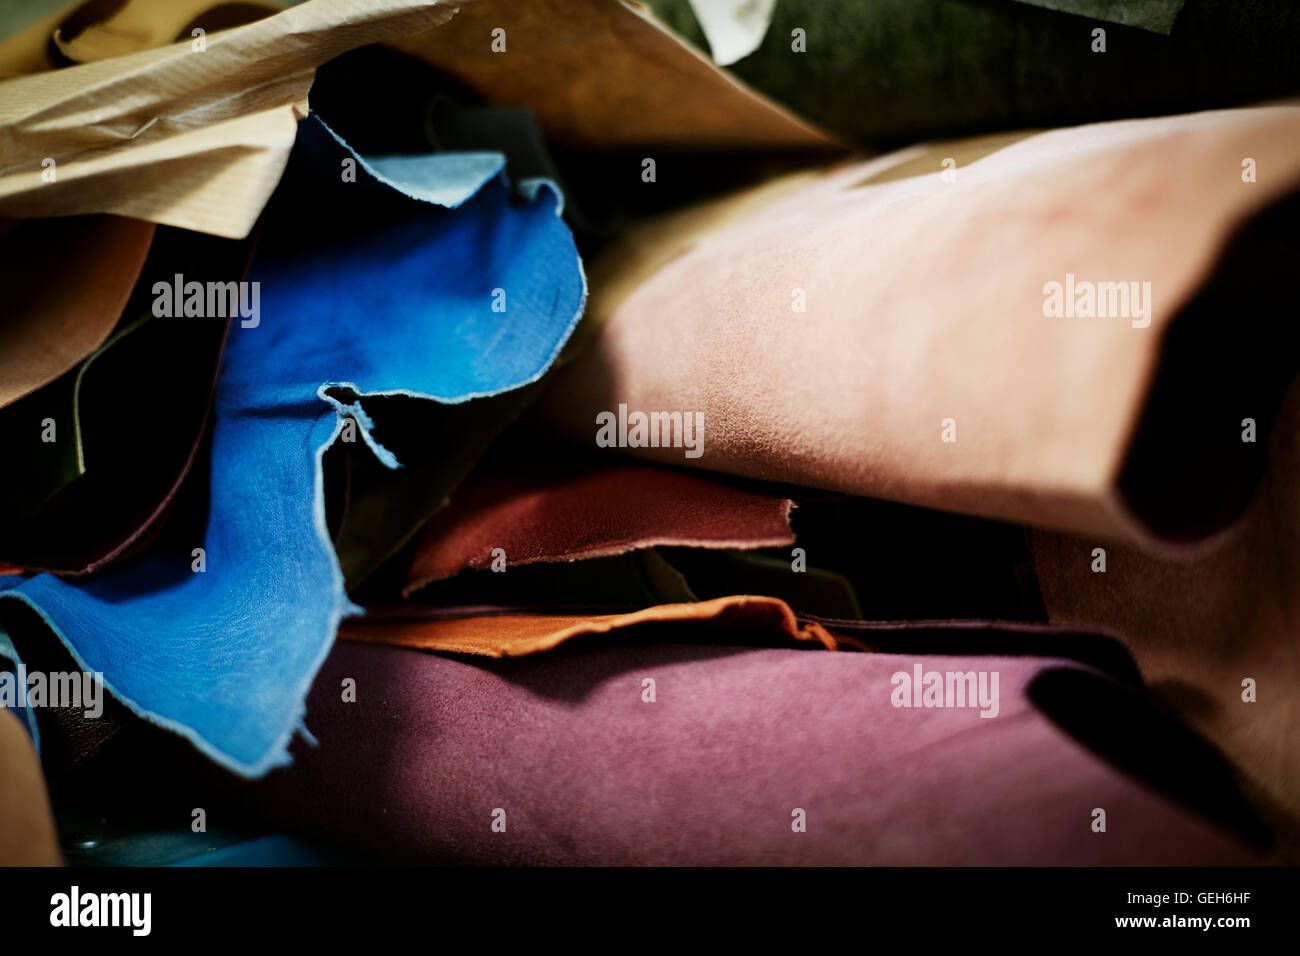 A pile of fabrics and leather heaped up in a bookbinding workshop. Stock Photo